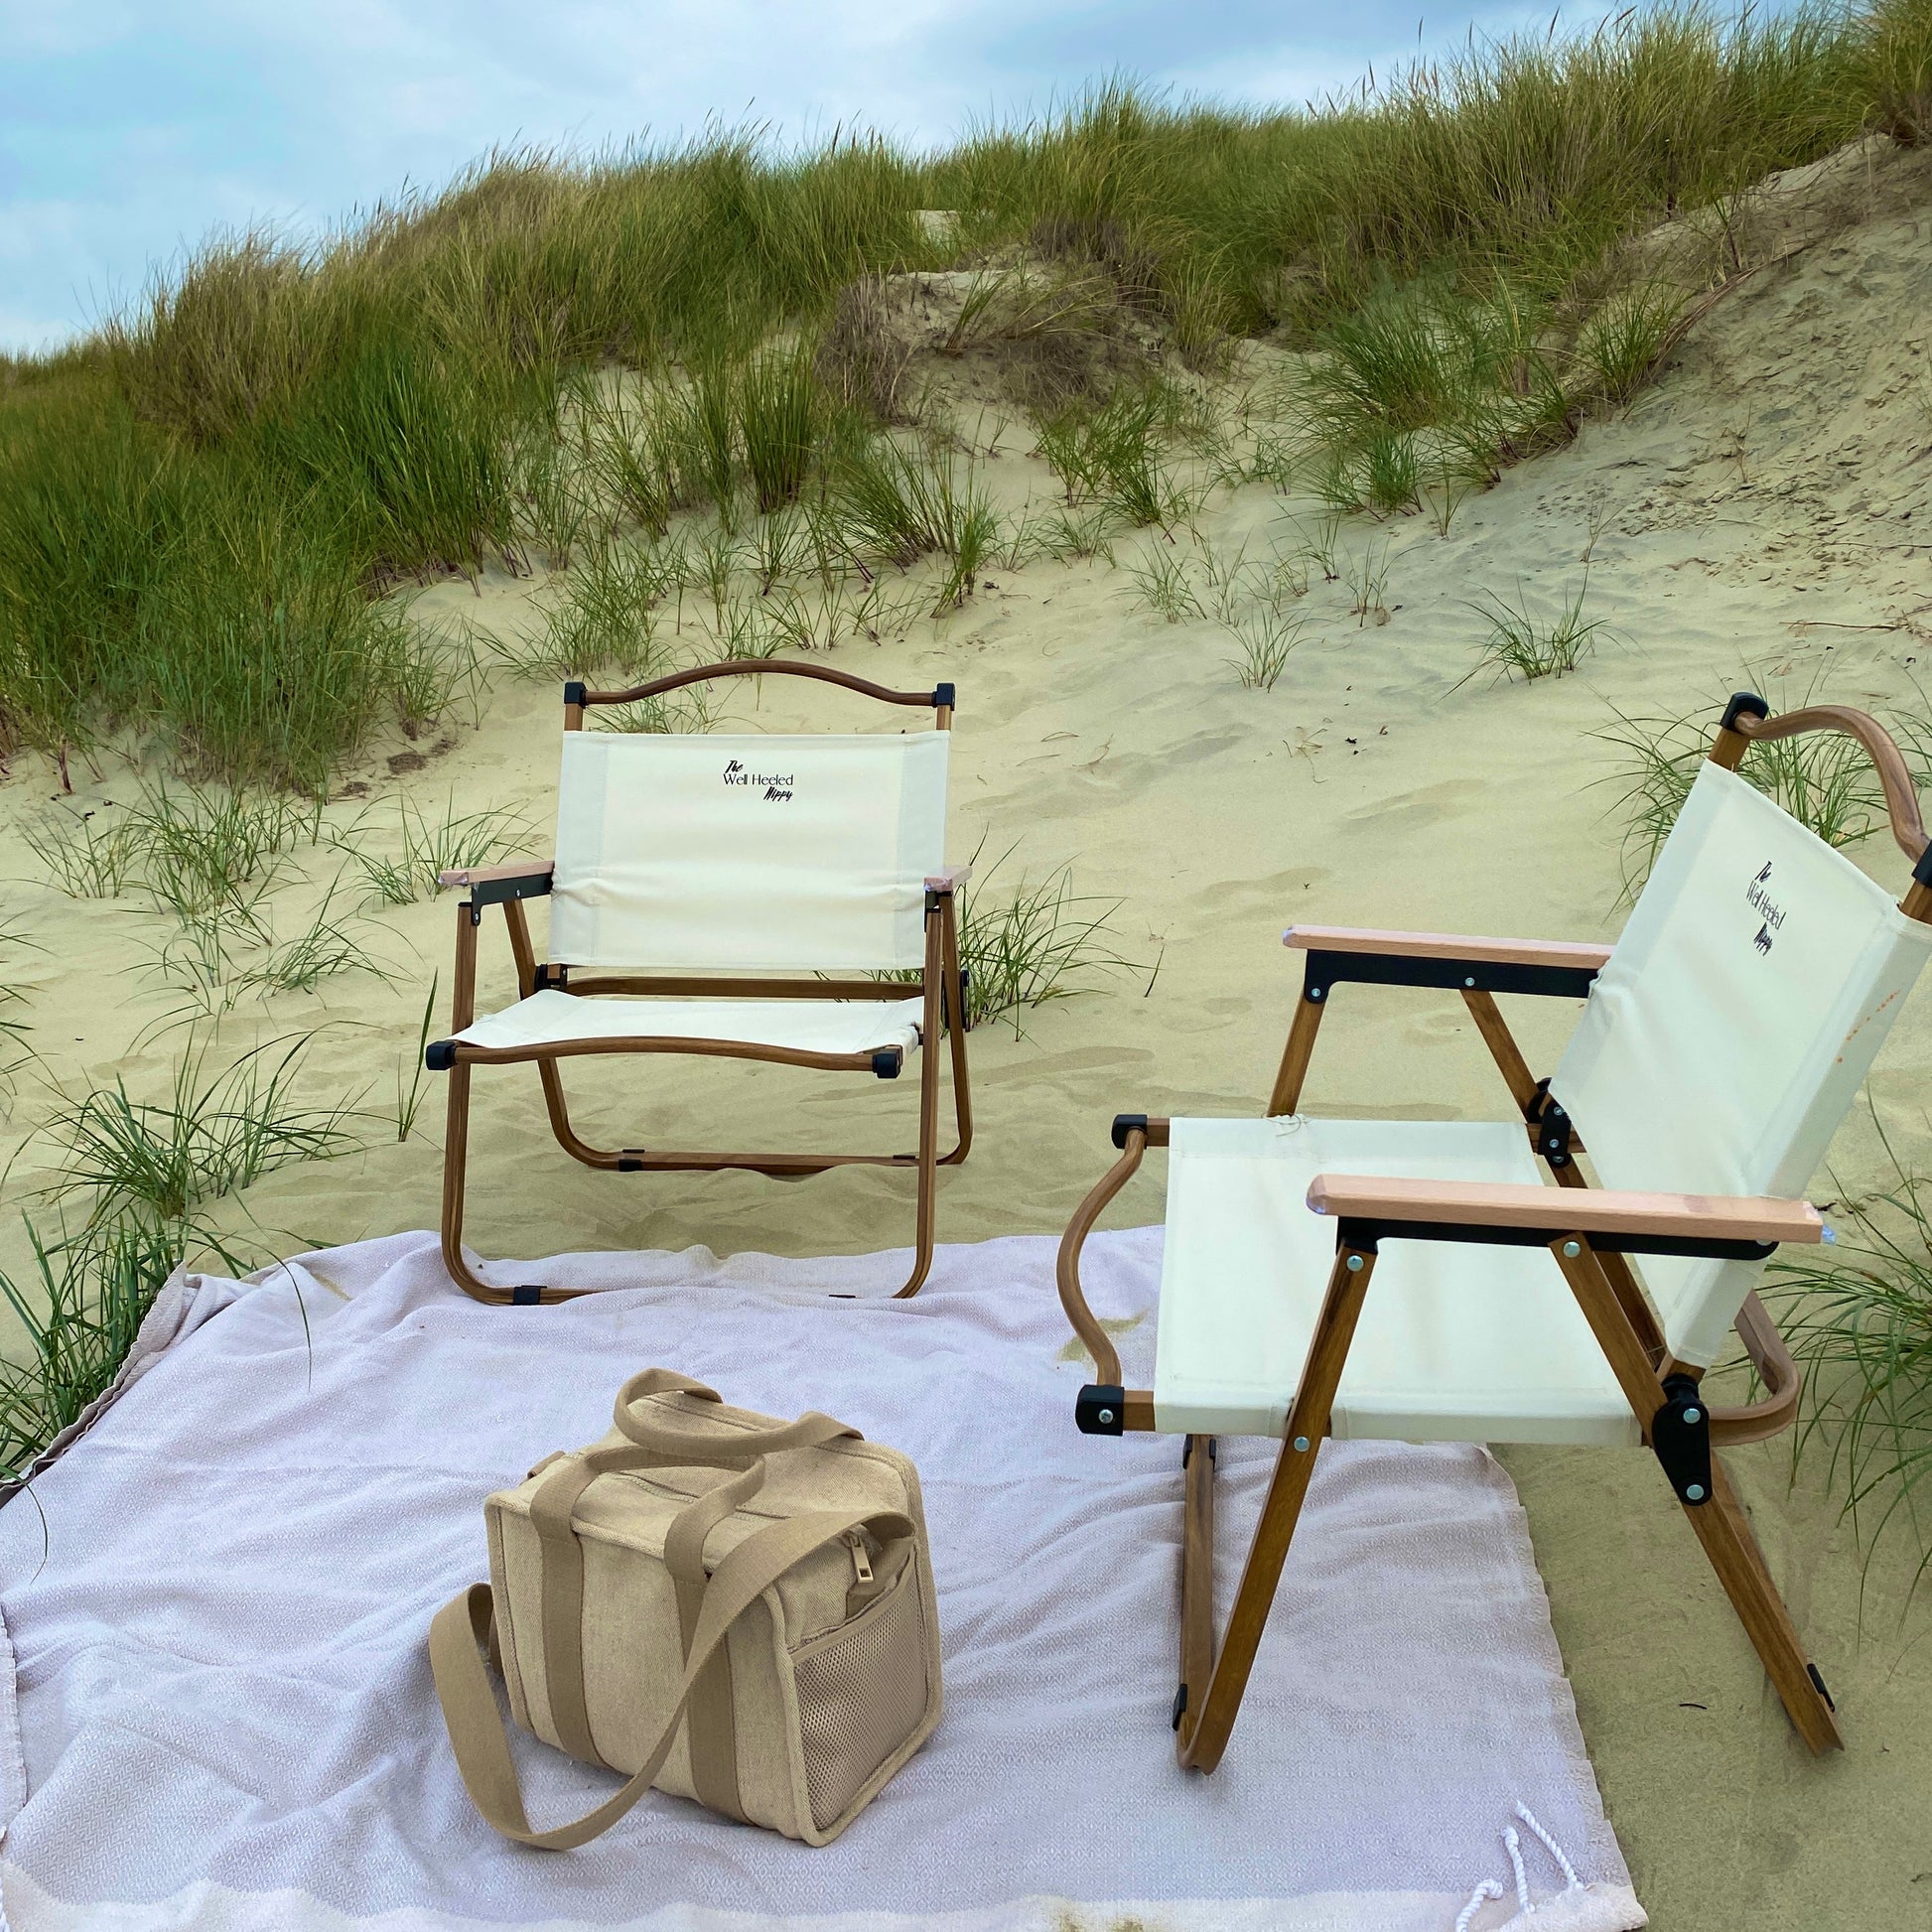 A pair of lightweight, foldable, stylish camping chairs by The Well Heeled Hippy store - a perfect picnic chair for a sandy beach. Shown in beige